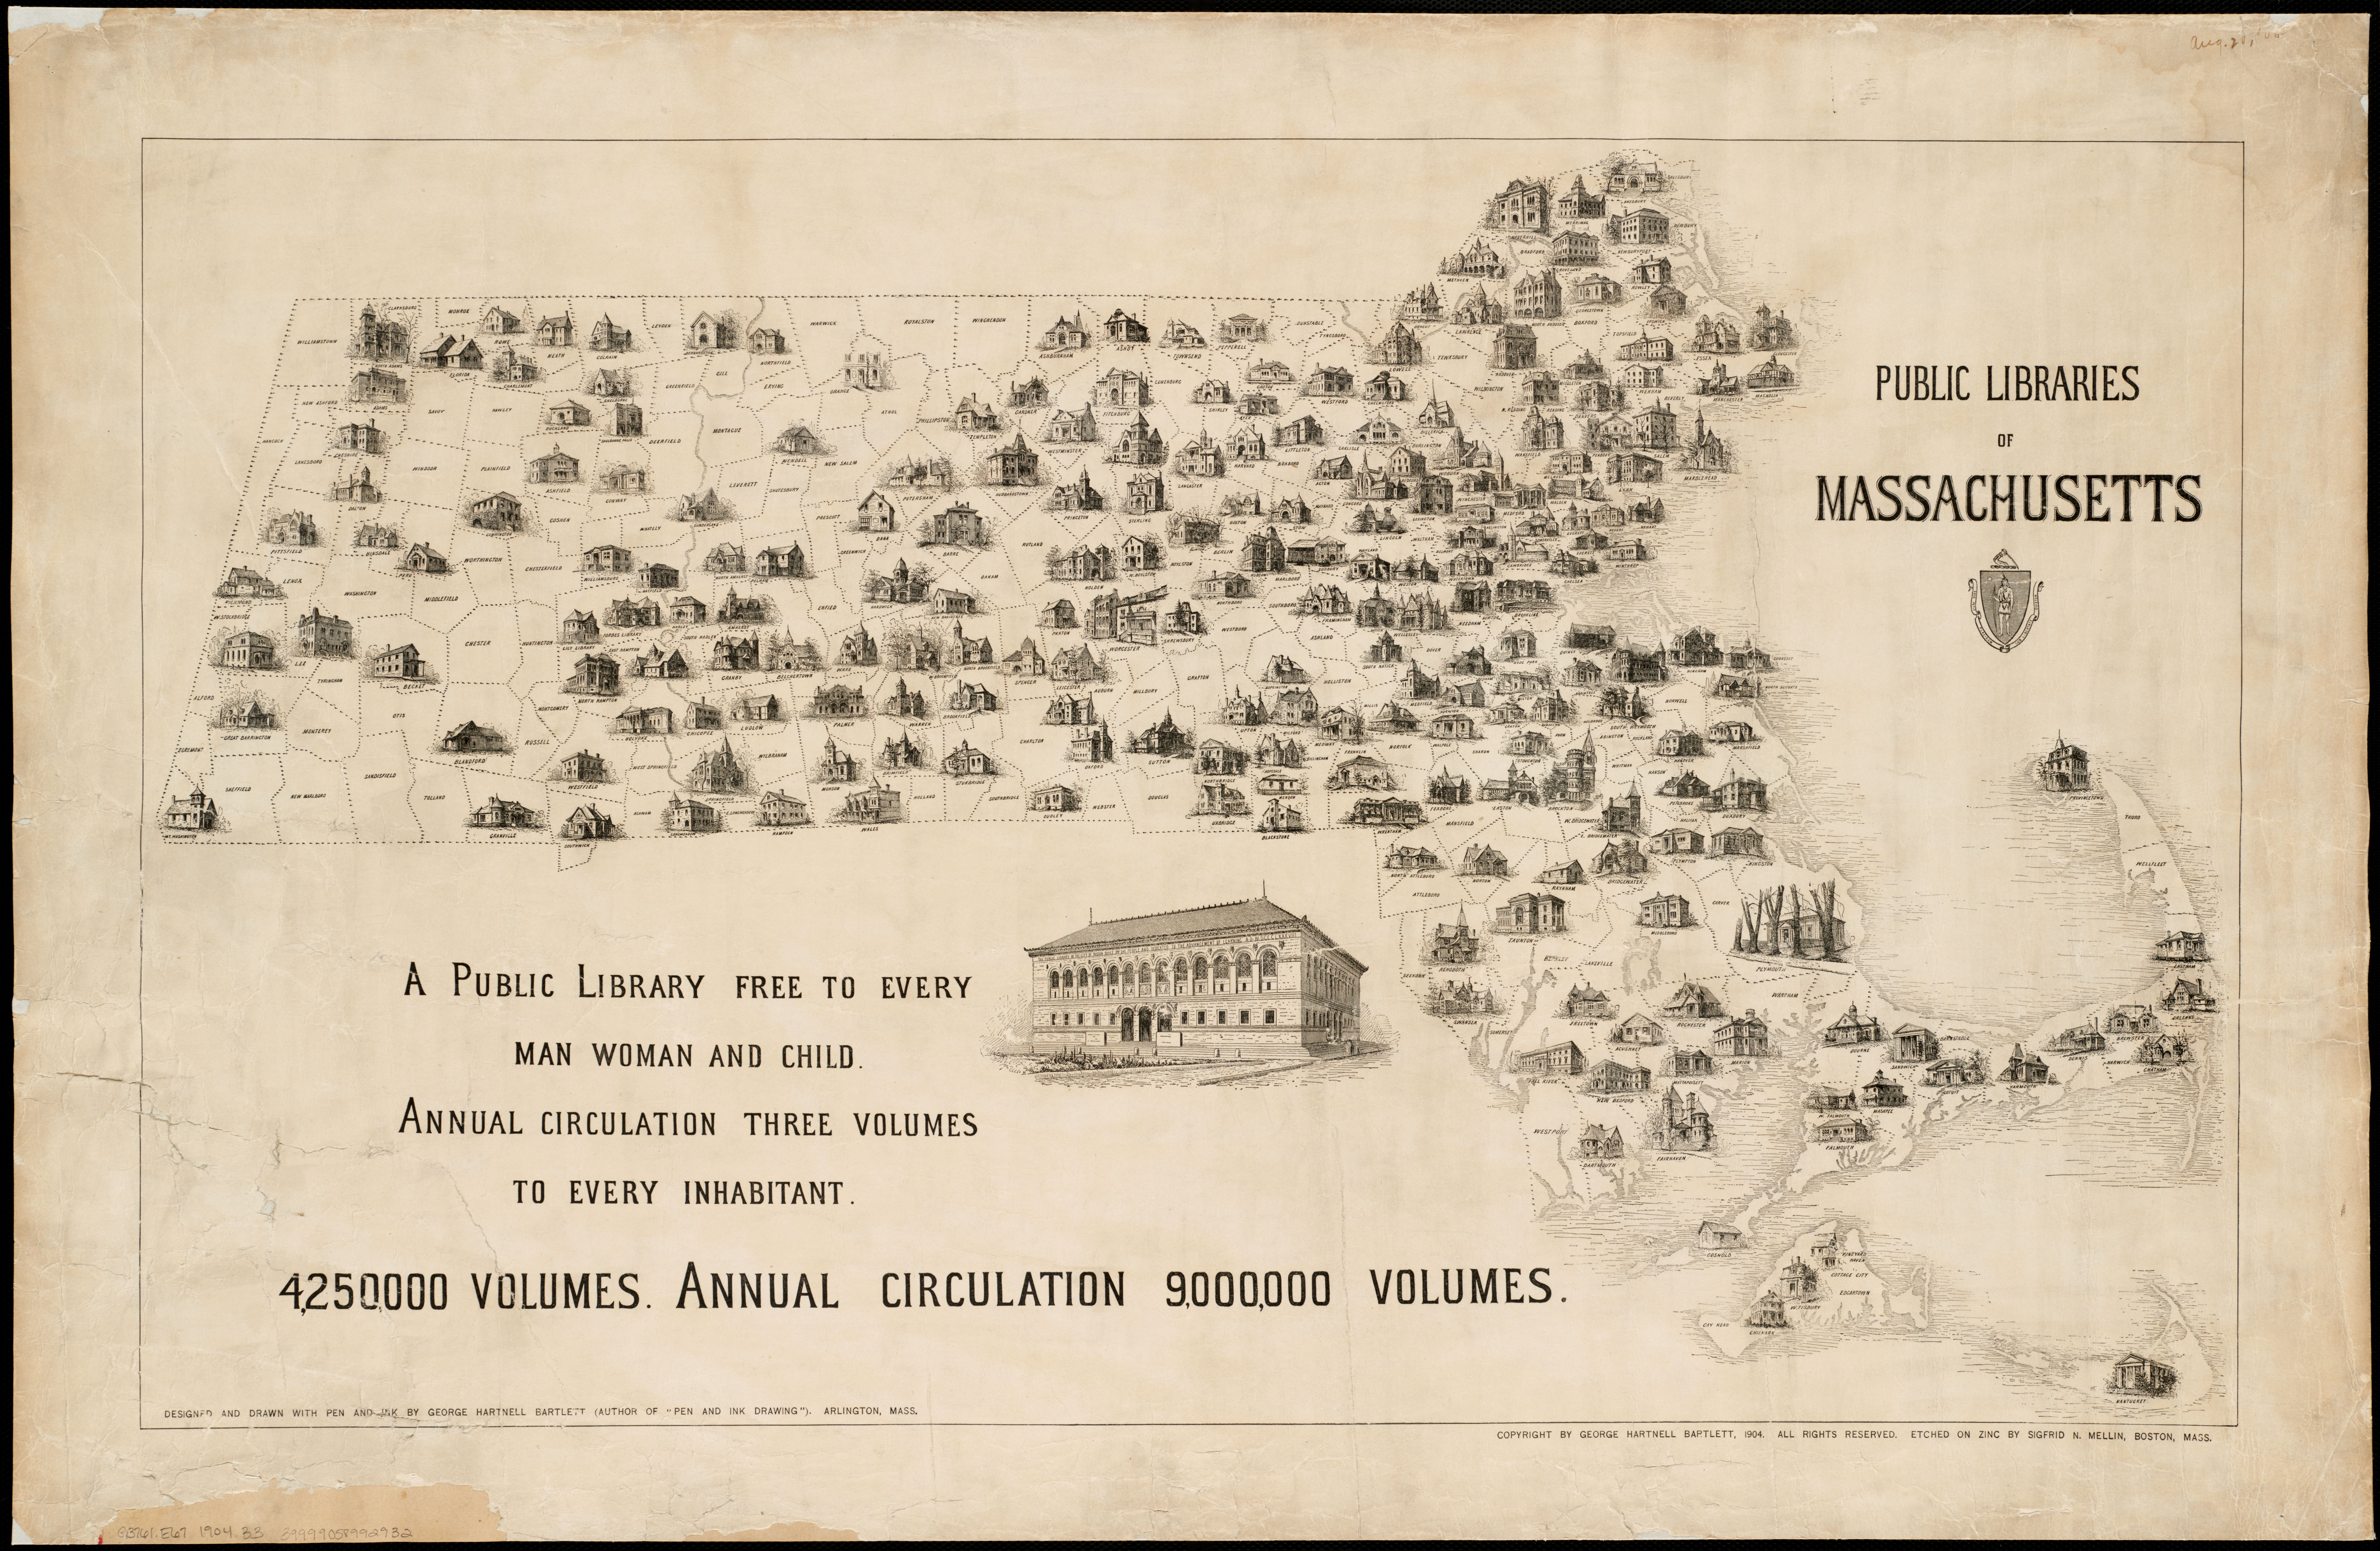 The public libraries of Massachusetts, a 1904 map from LMEC collections